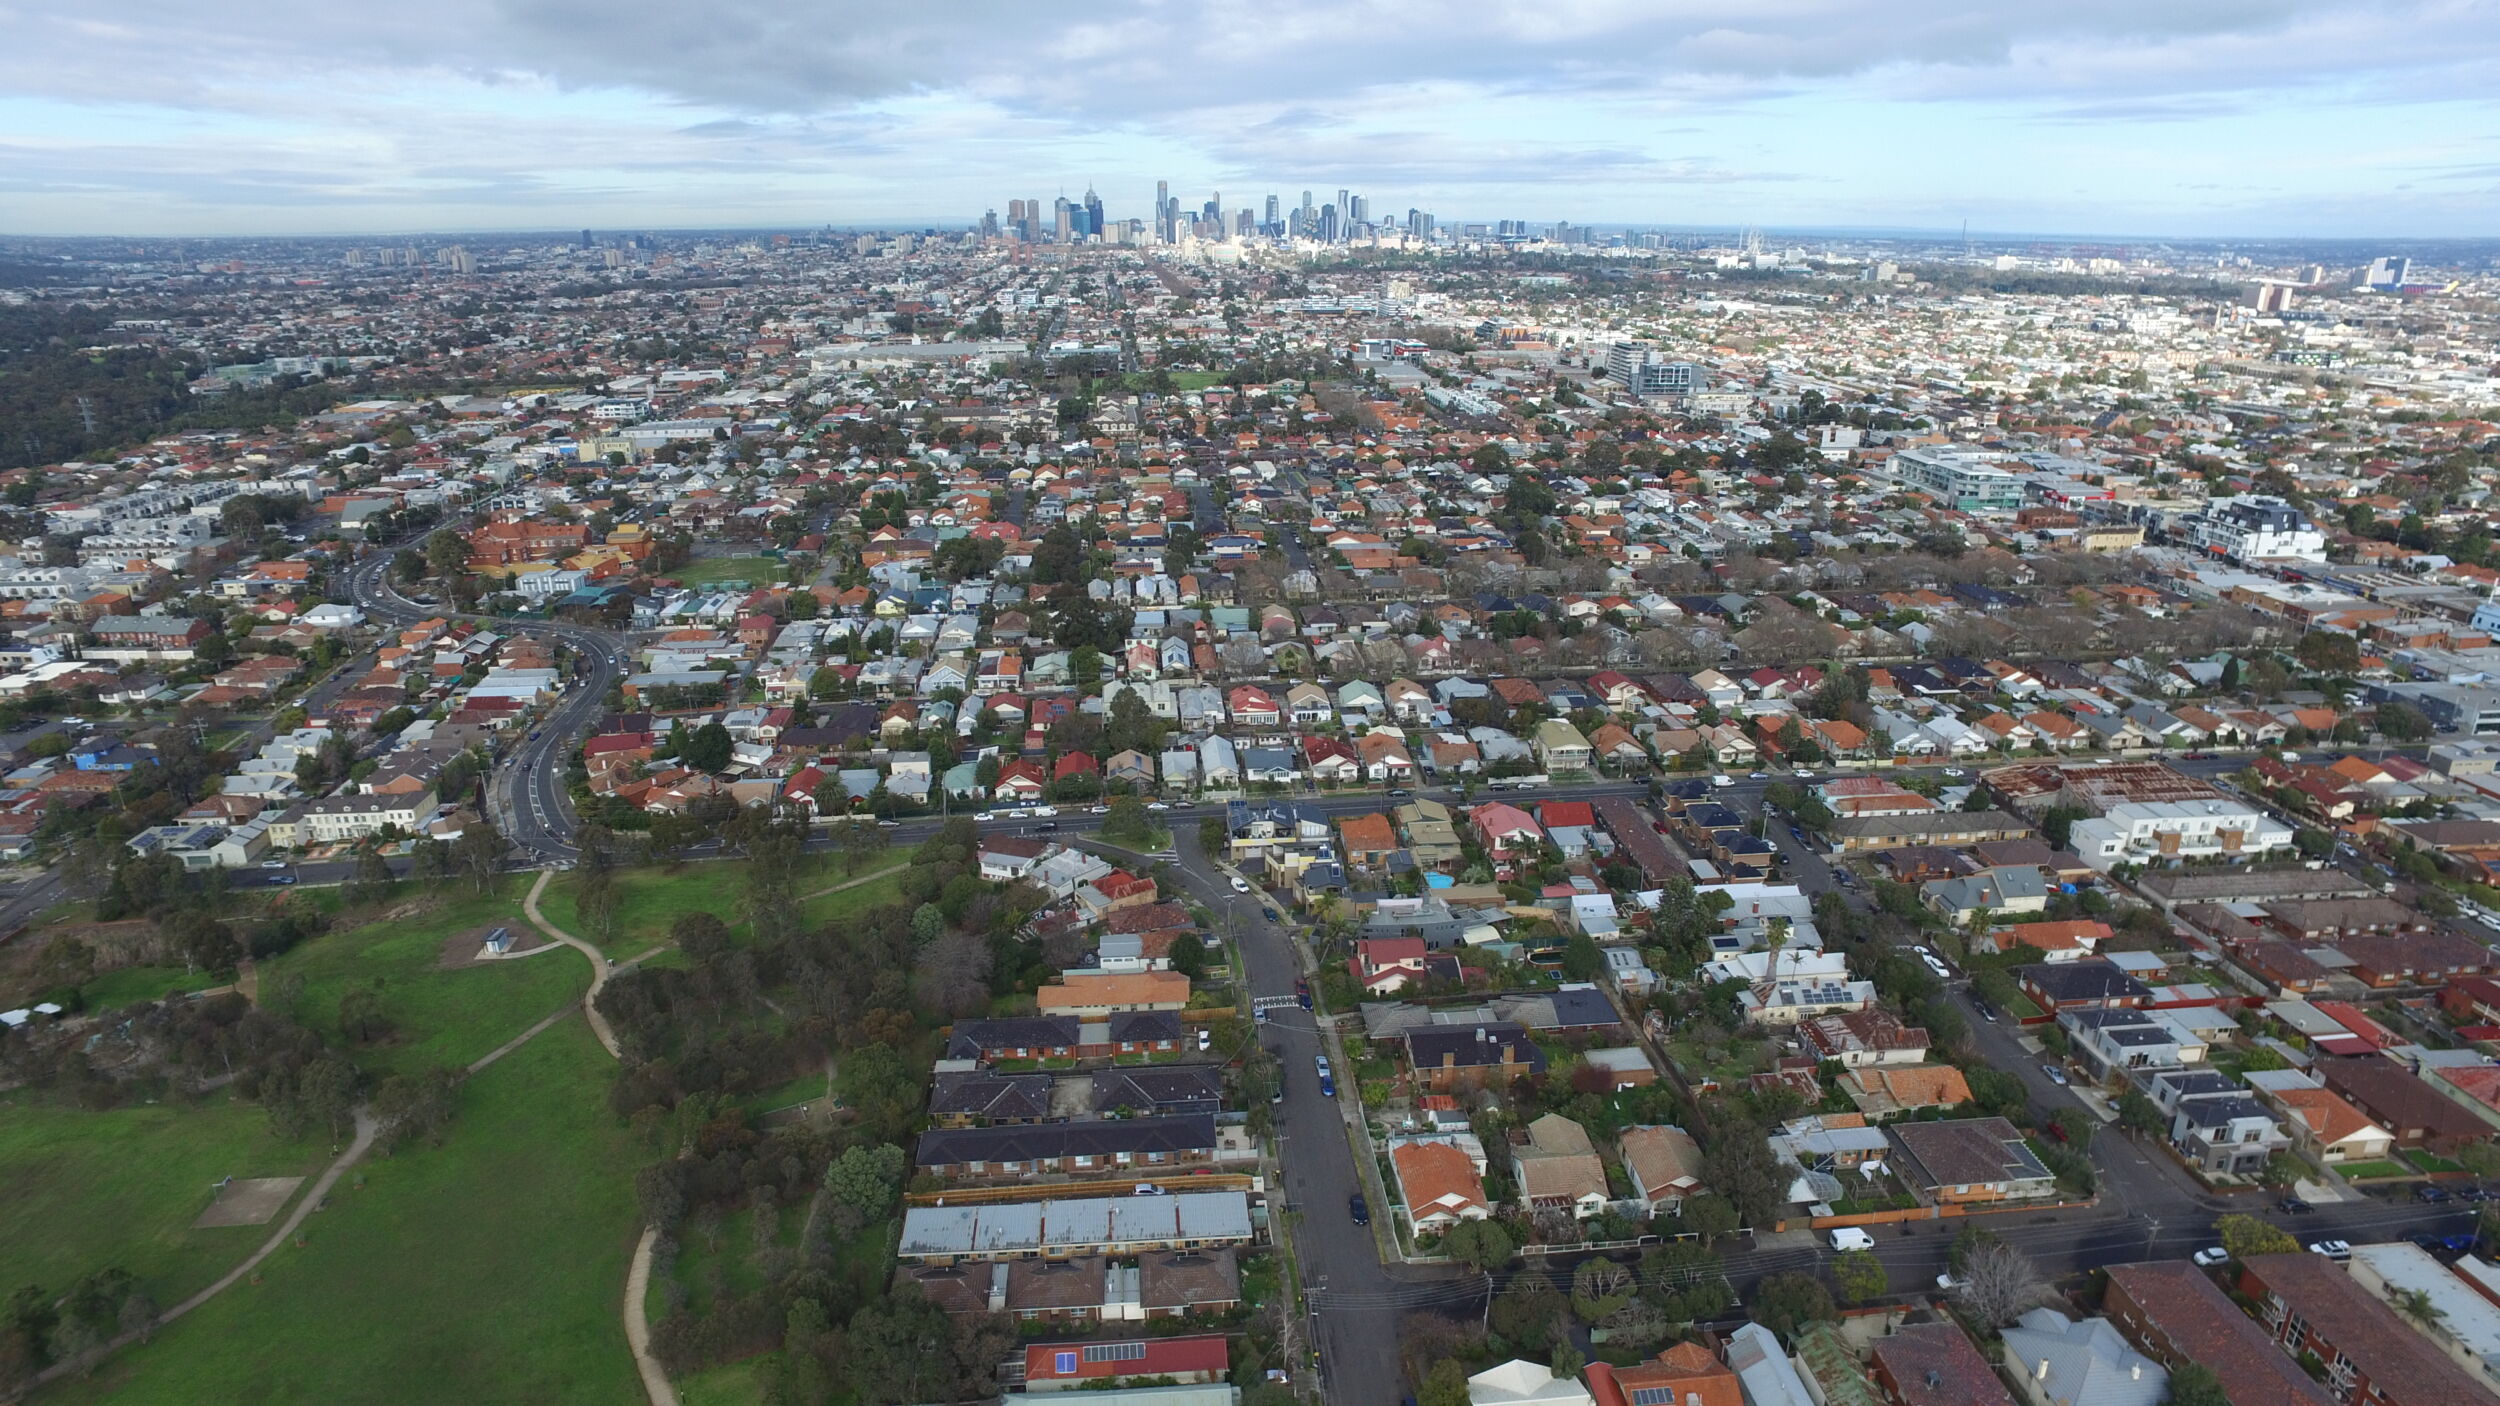 Aerial view of Moreland looking south towards CBD